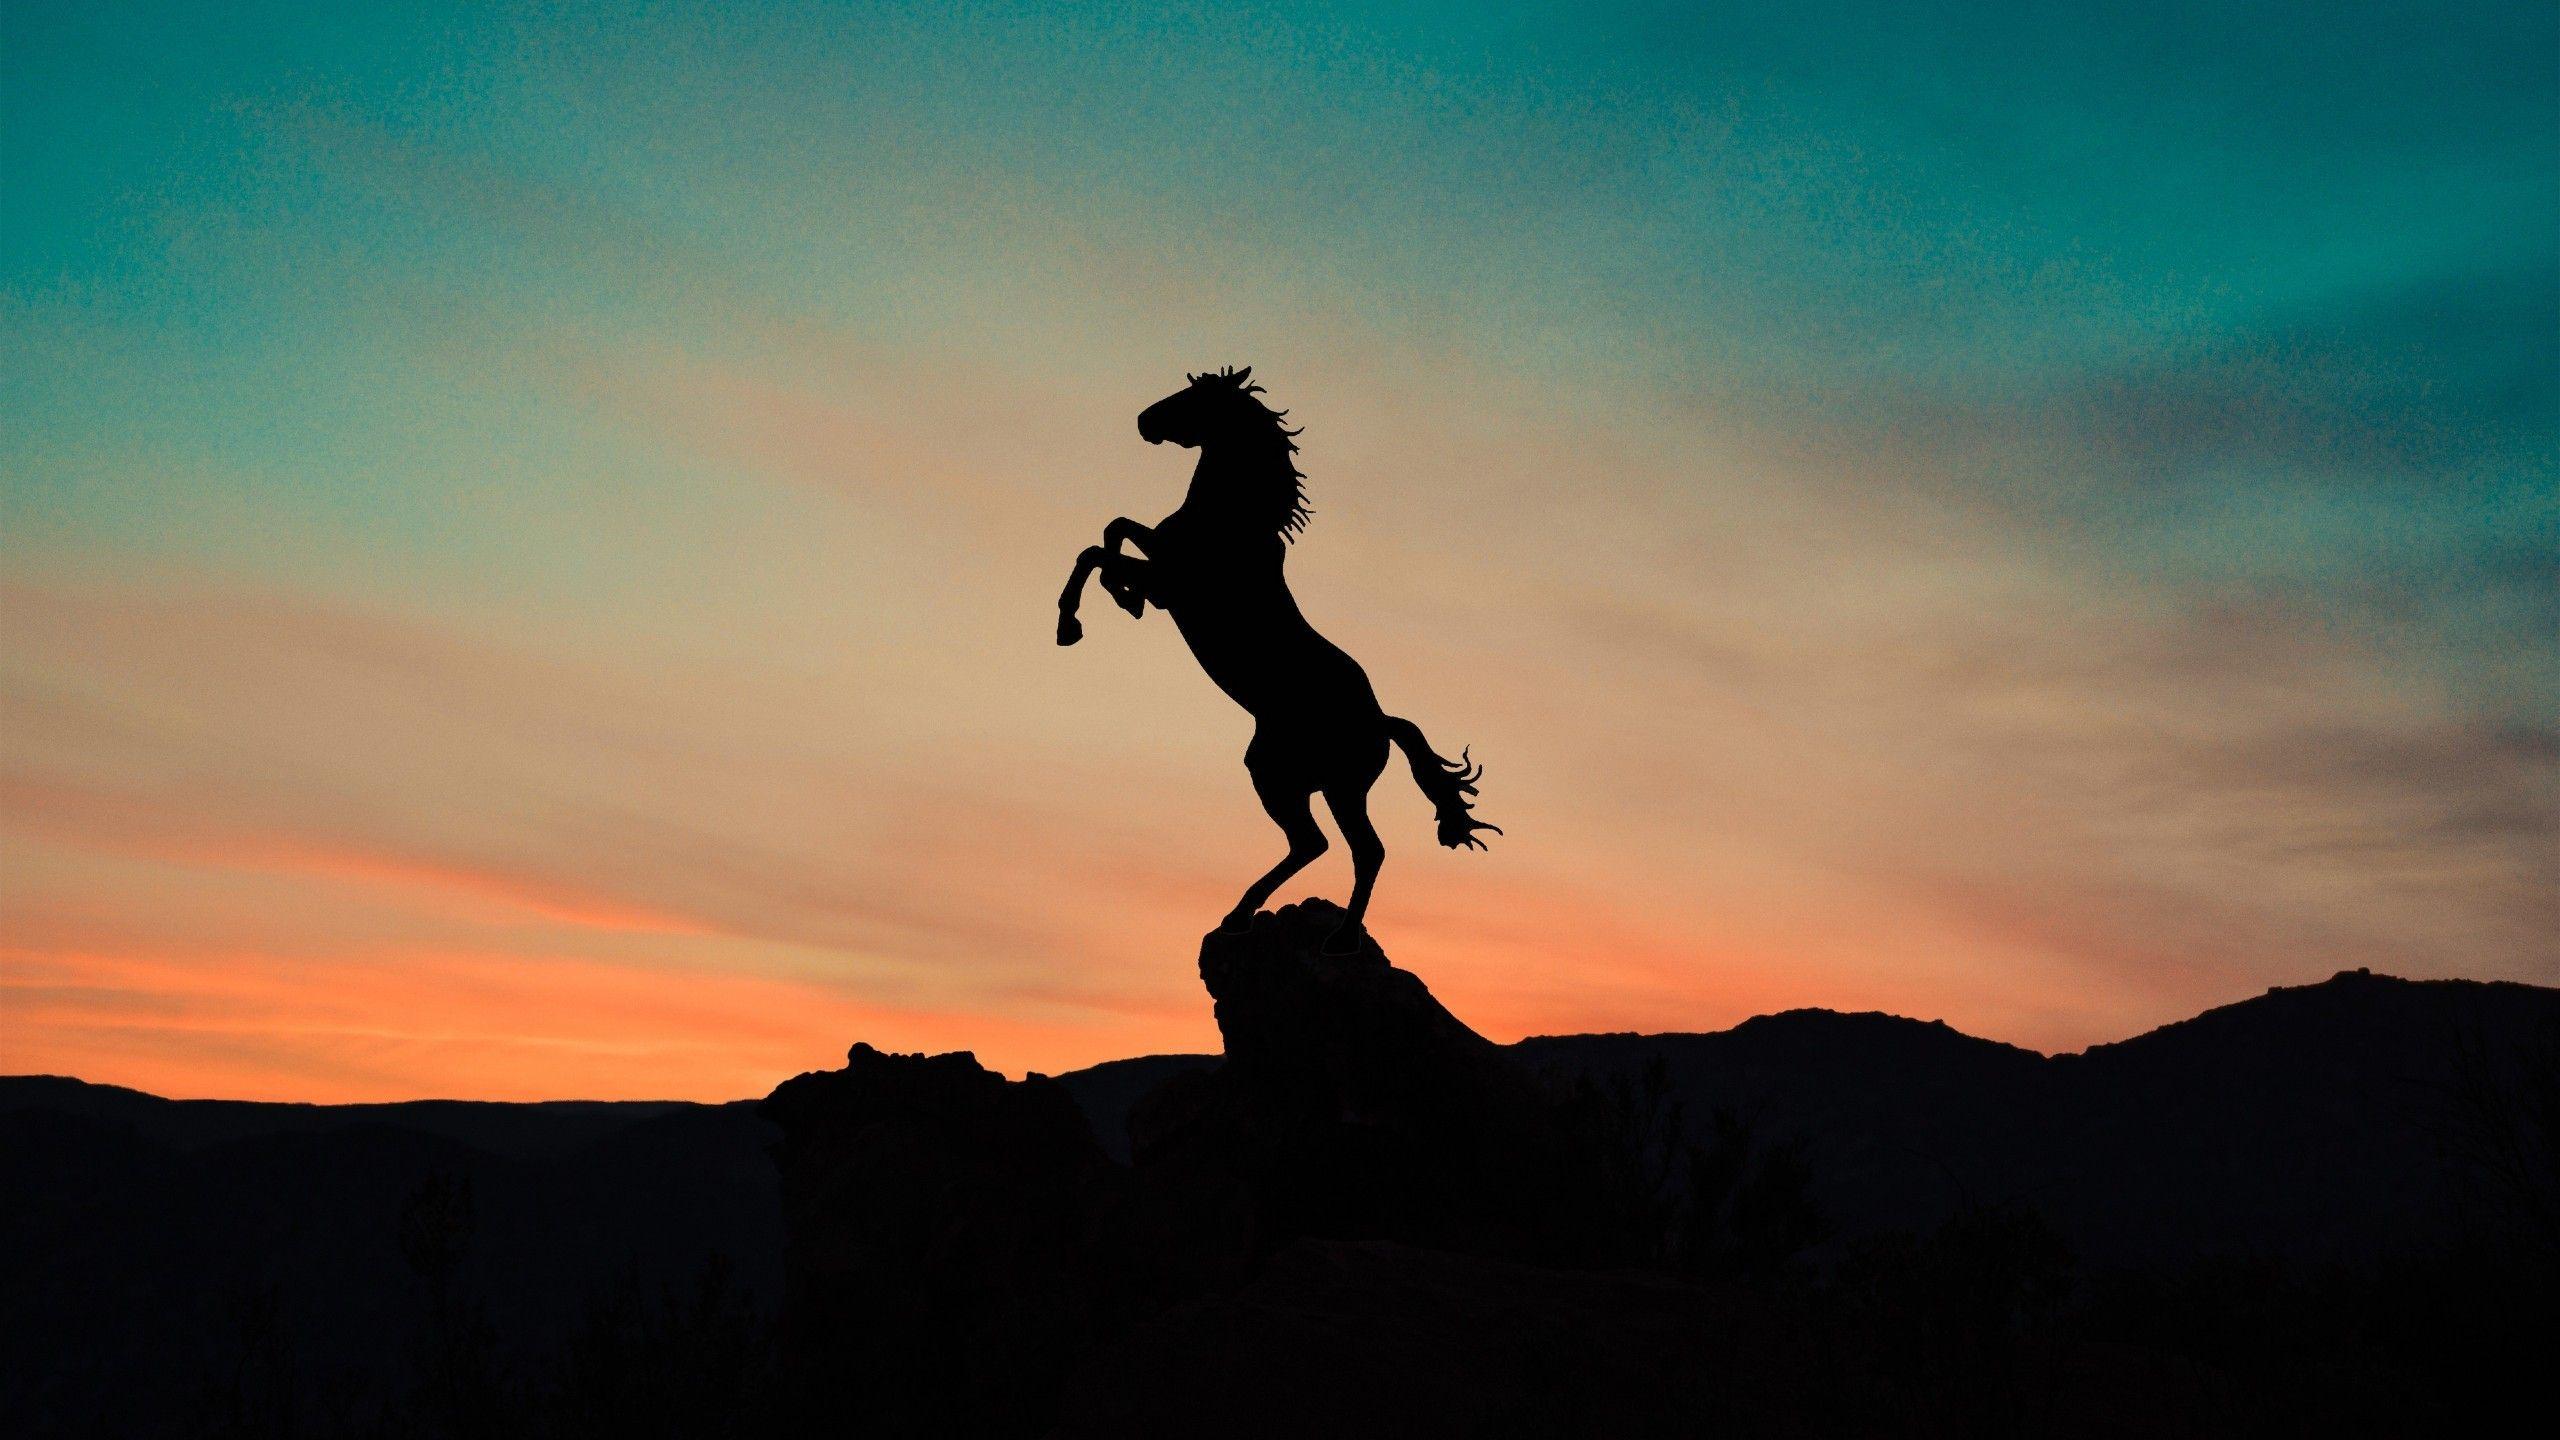 Sunset Horse Silhouette Acrylic Painting Hd Wallpaper  Wallpapers13com